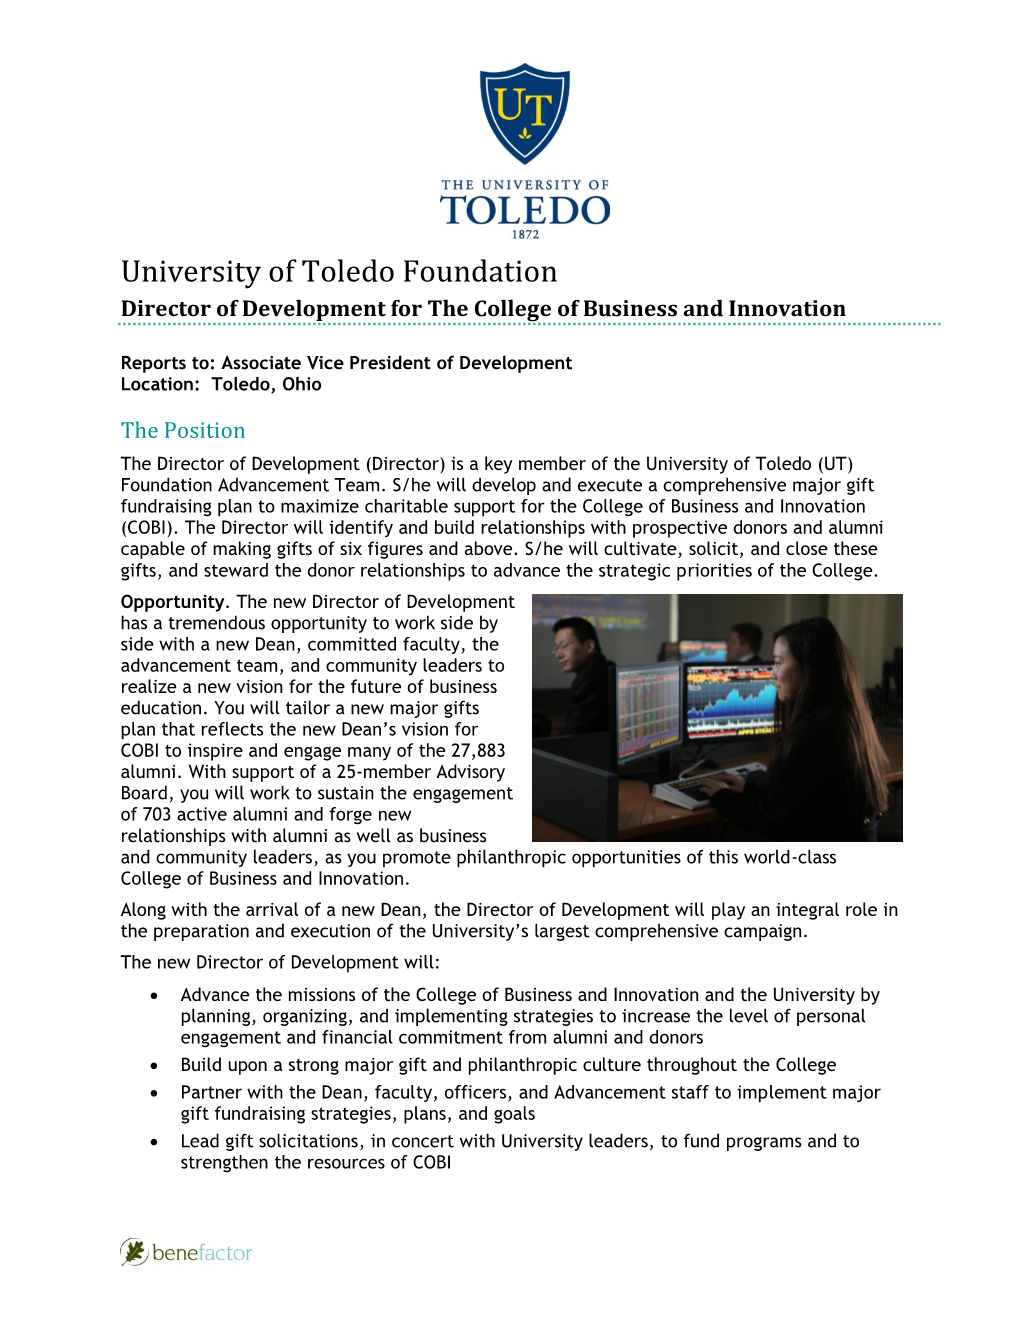 University of Toledo Foundation Director of Development for the College of Business and Innovation